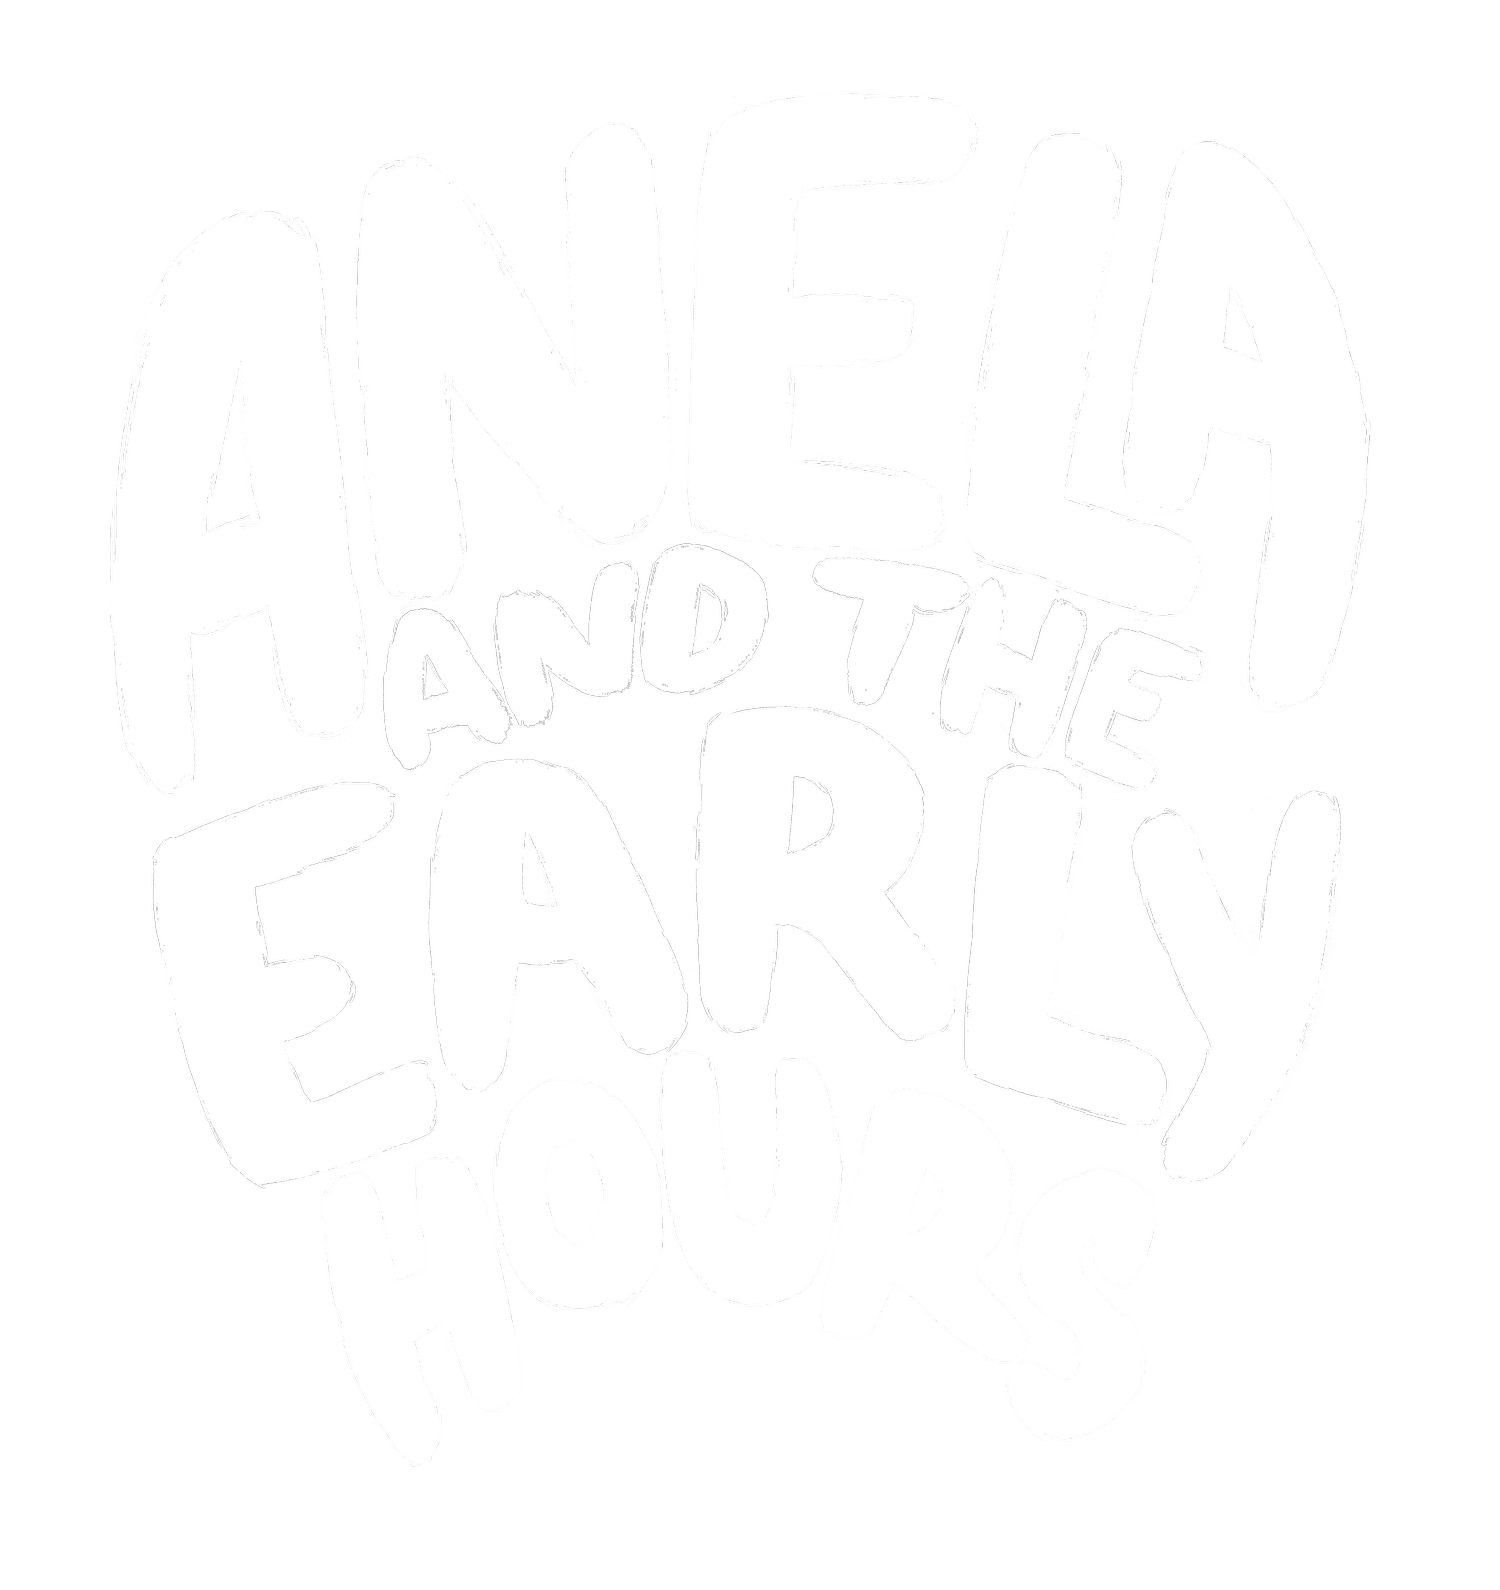 Anela and the Early Hours